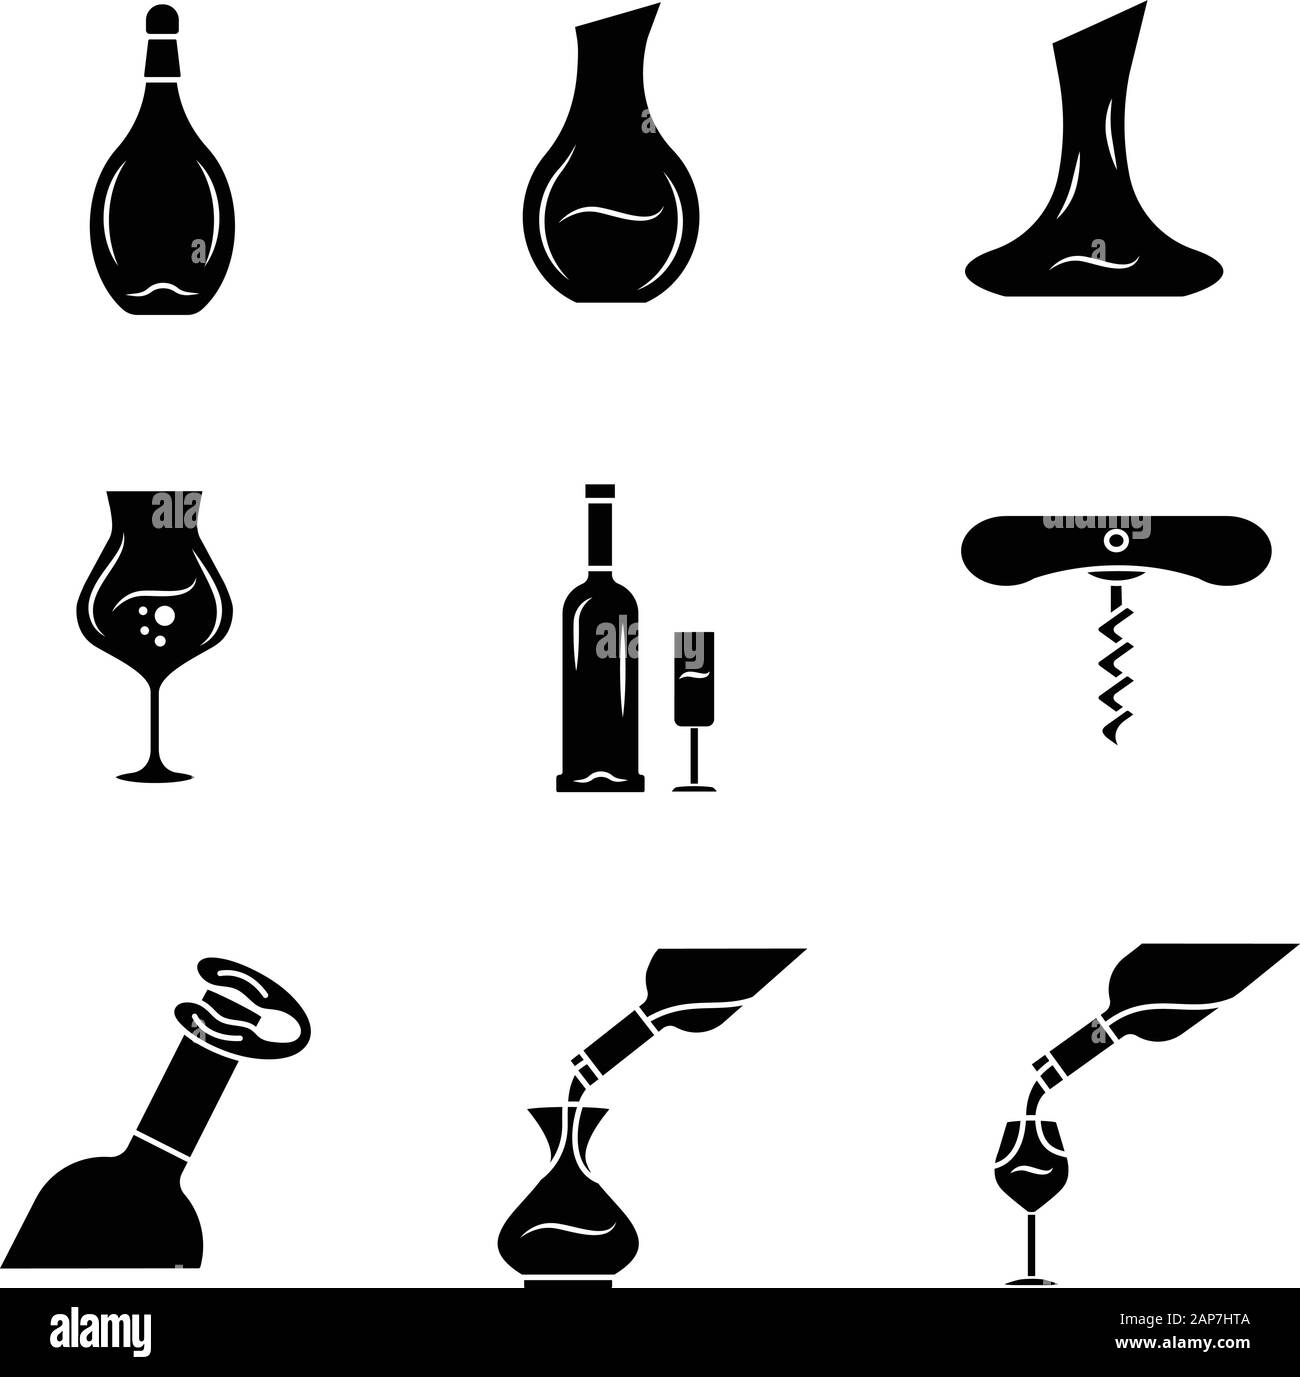 Alcohol drinks tableware glyph icons set. Wine glasses, decanters, bottles. Foil cutter, corkscrew. Glassware, cocktail, beverage service. Silhouette Stock Vector